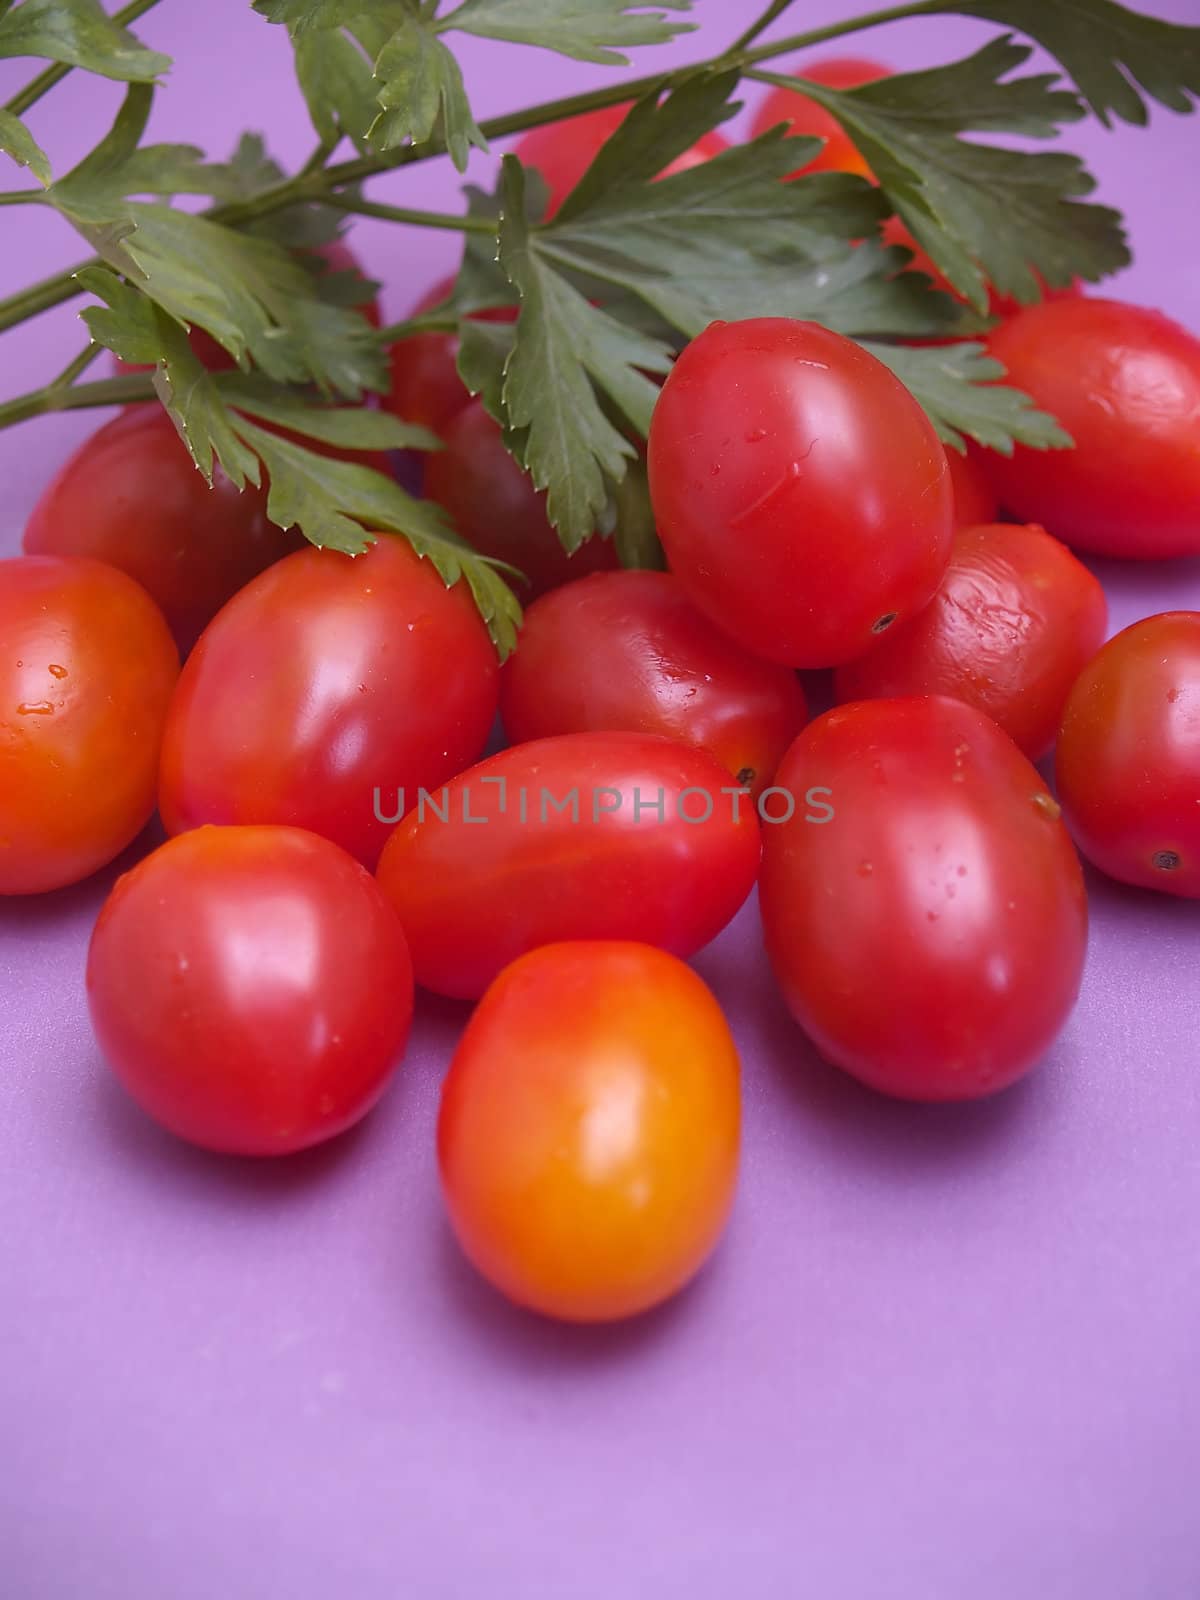  cherry tomatoes and parsley by lauria